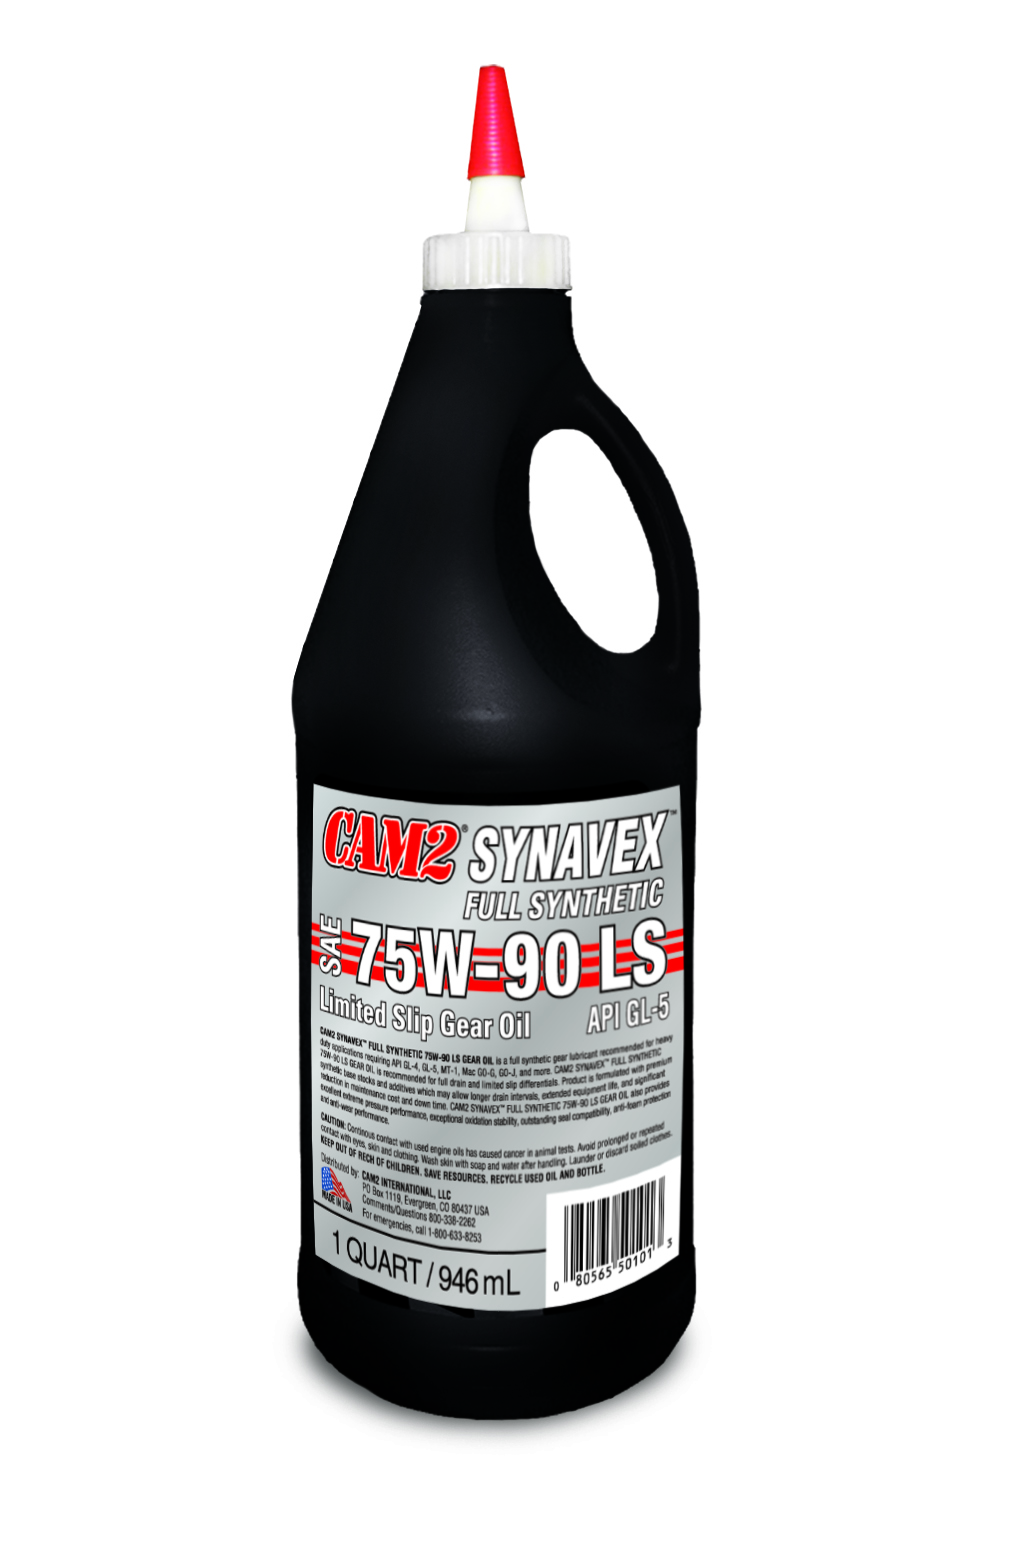 CAM2 SYNAVEX FULL SYNTHETIC 75W-90 (LS) GEAR OIL 80565-501